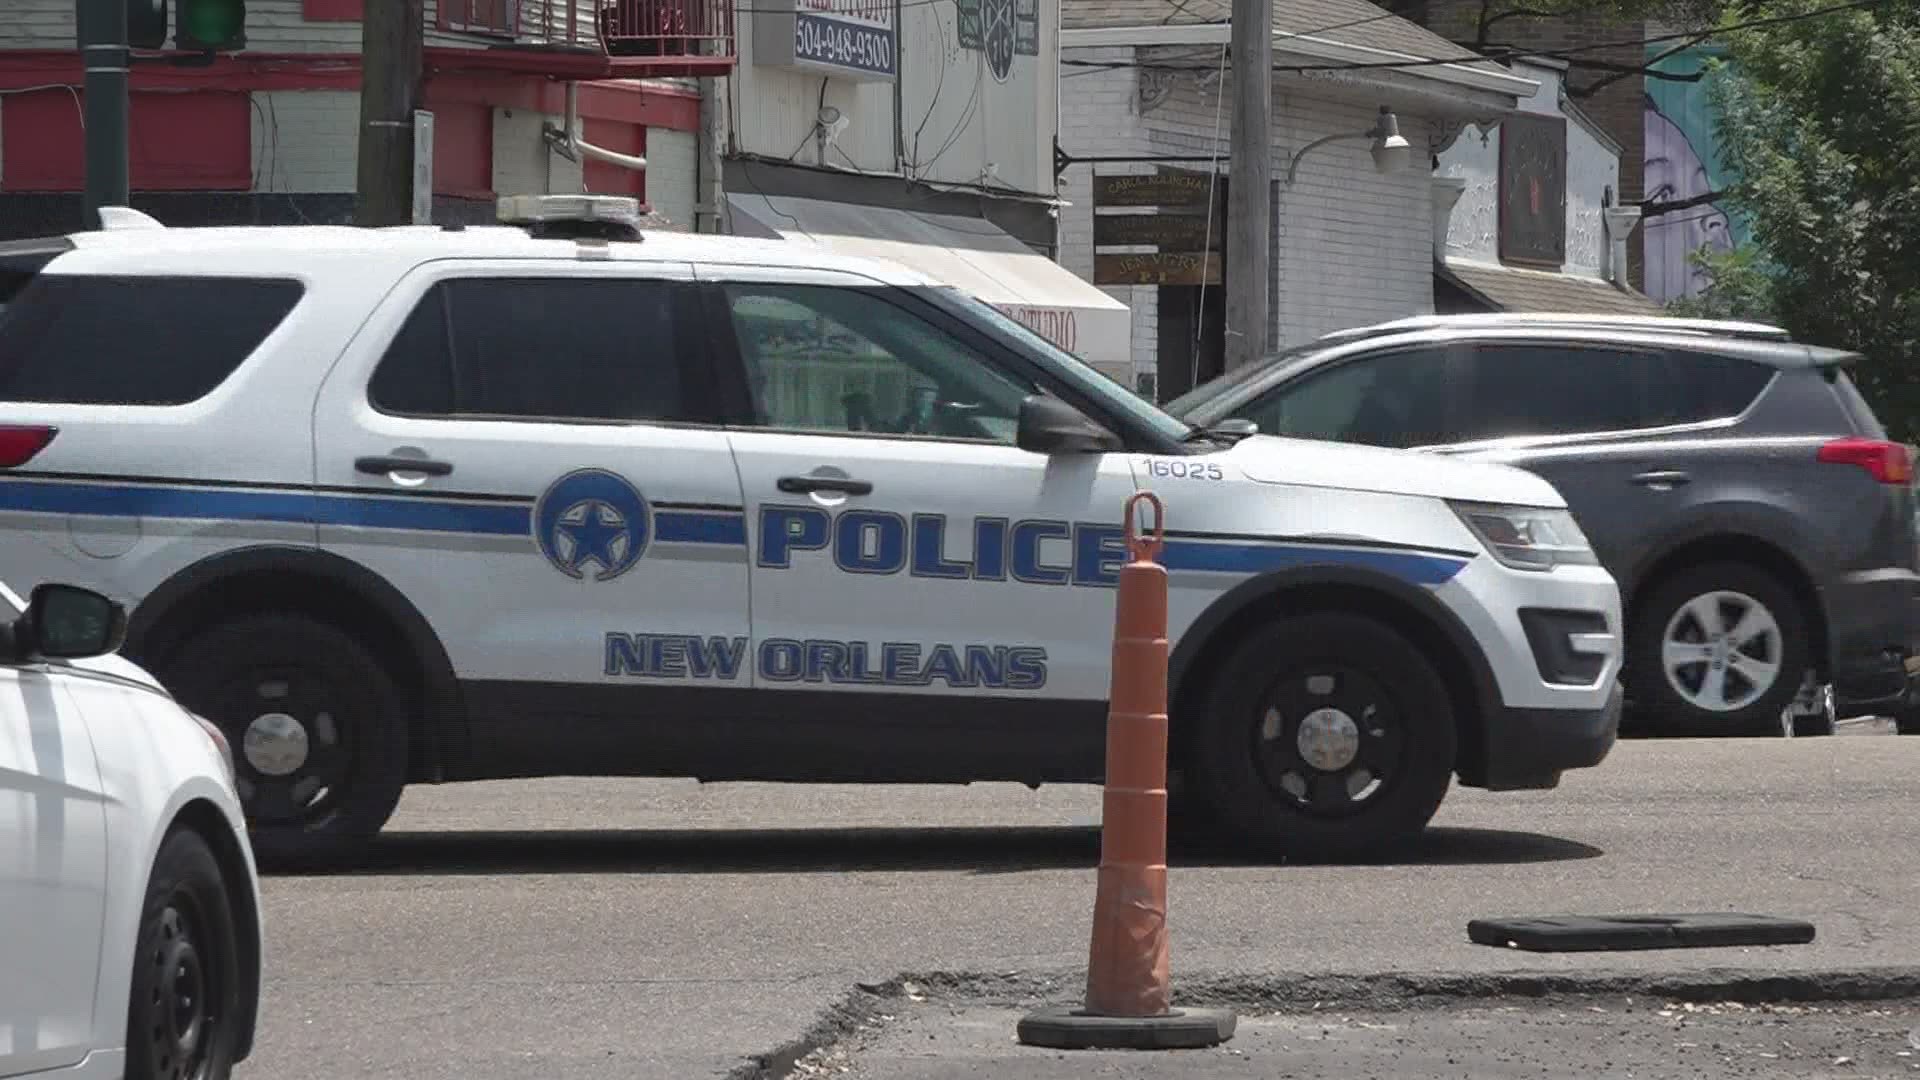 Gunfire rang out early Monday morning leading to the death of two people in the Seventh Ward.